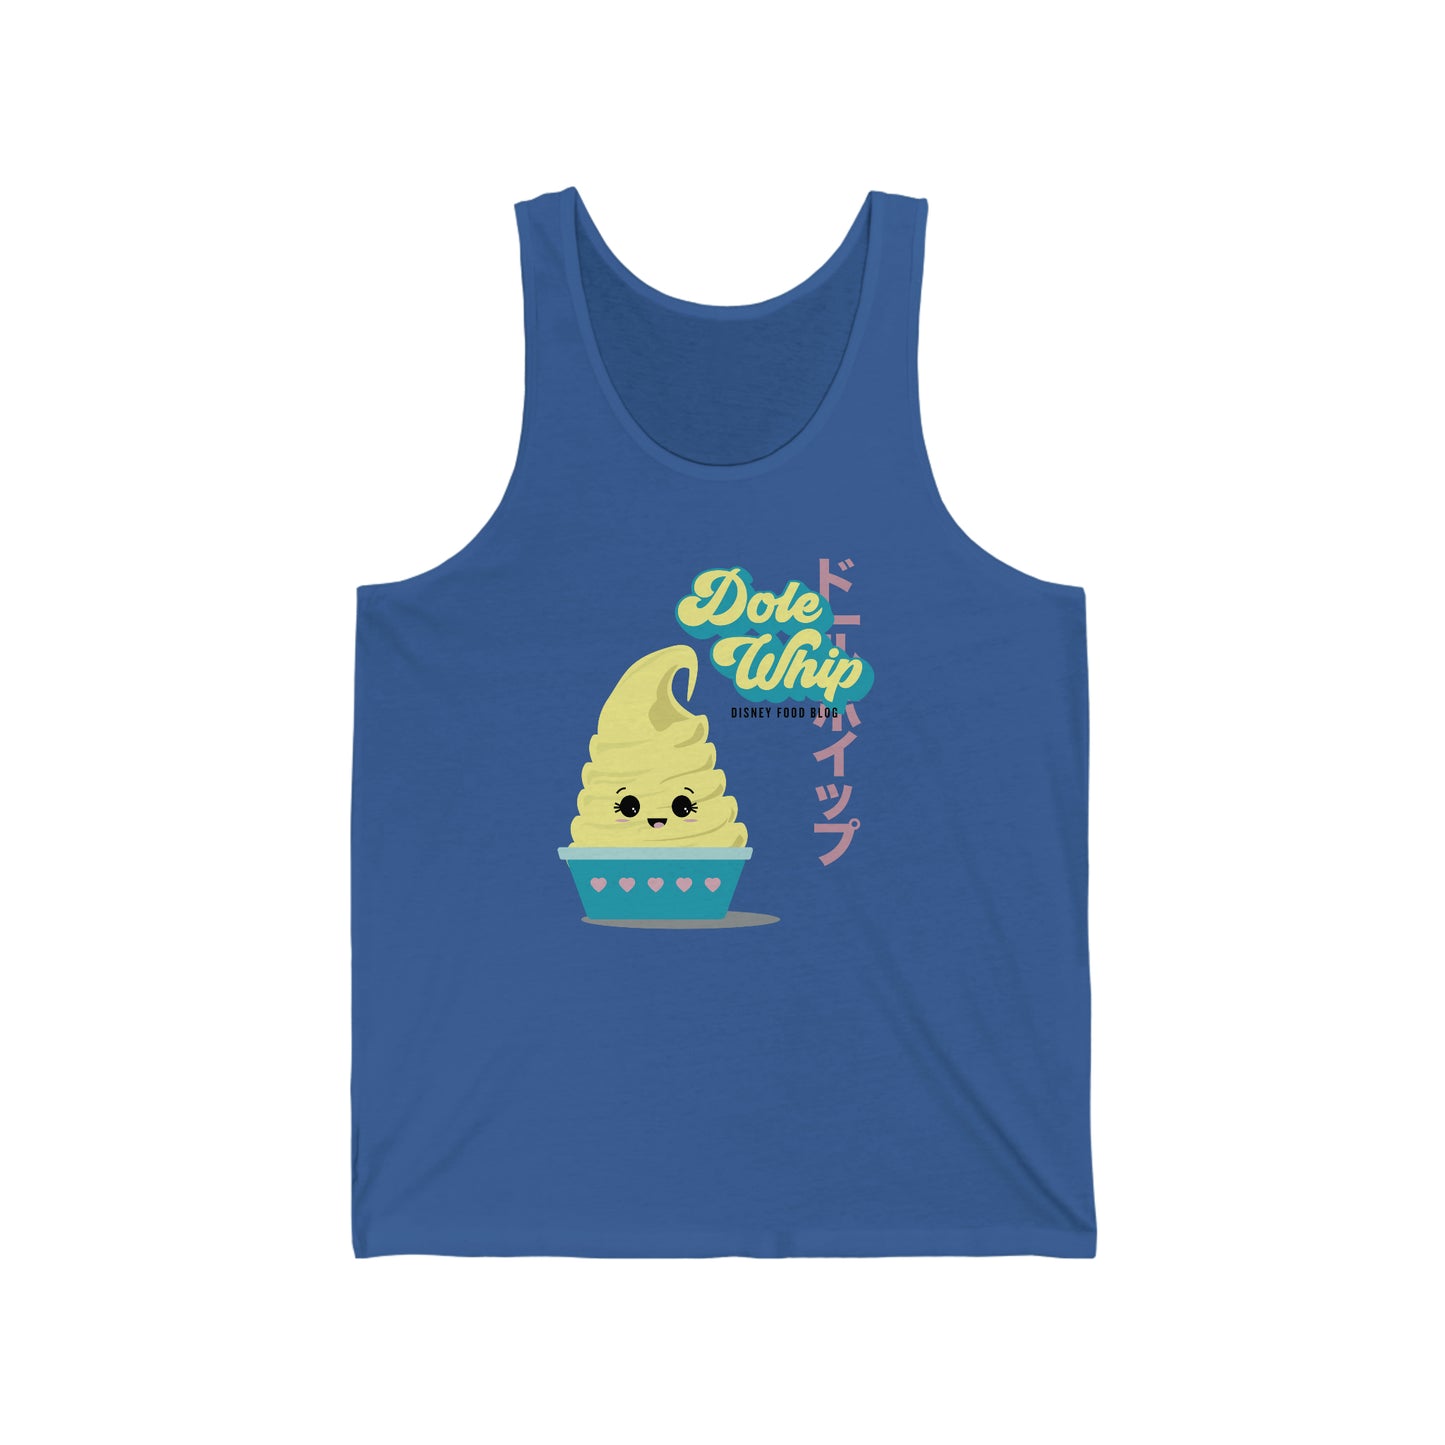 Dole Whip Adult Unisex Tank Top